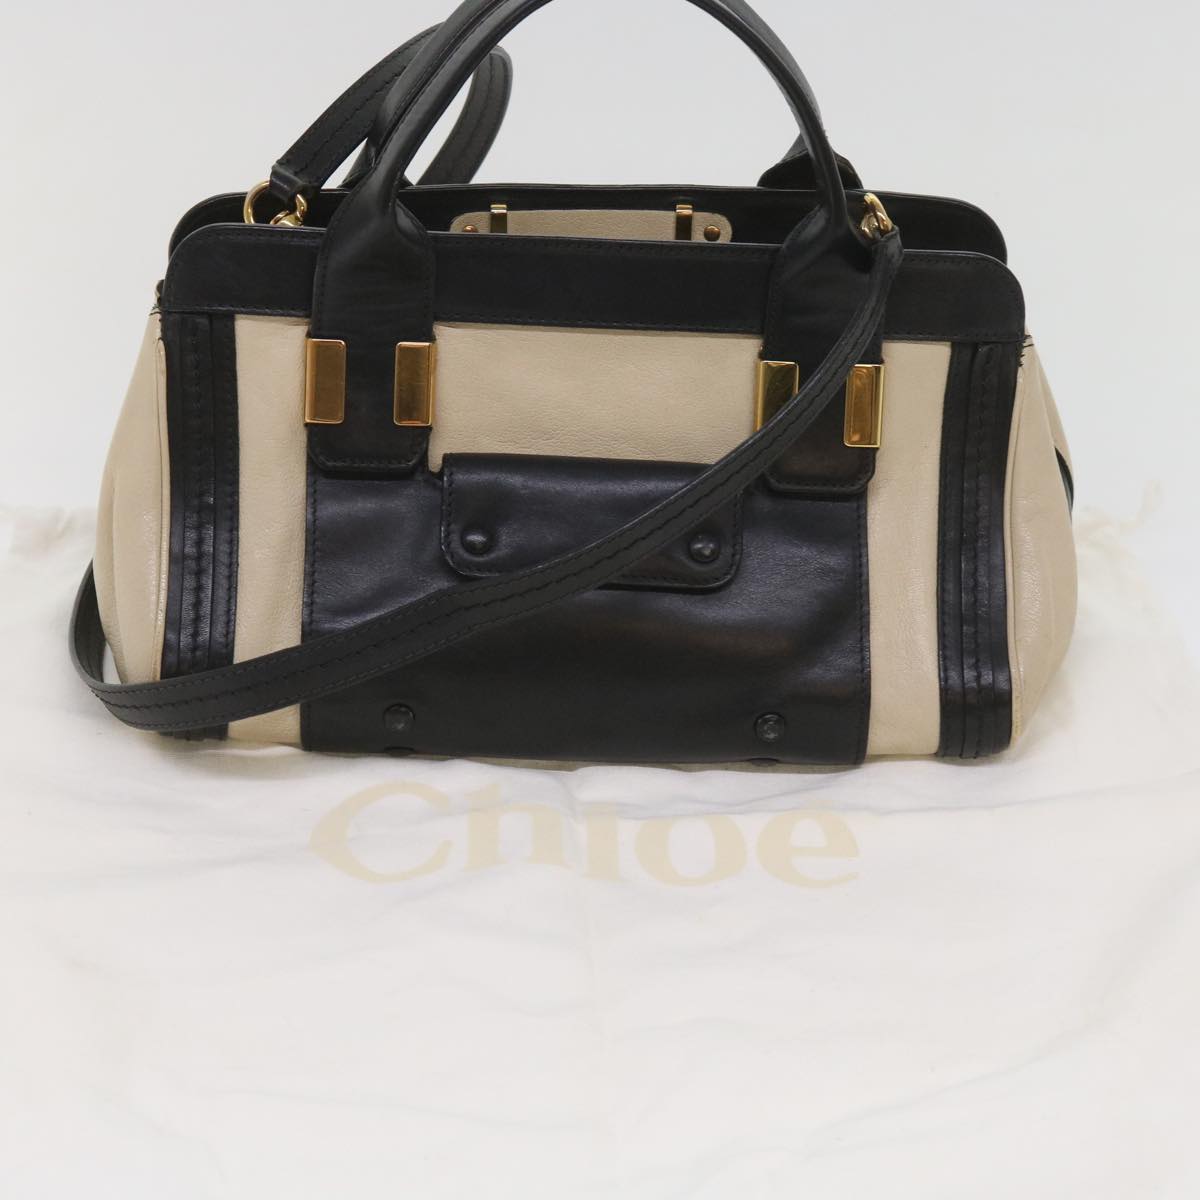 Chloe Alice Hand Bag Leather 2way Beige 04 14 63 65 Auth bs11871